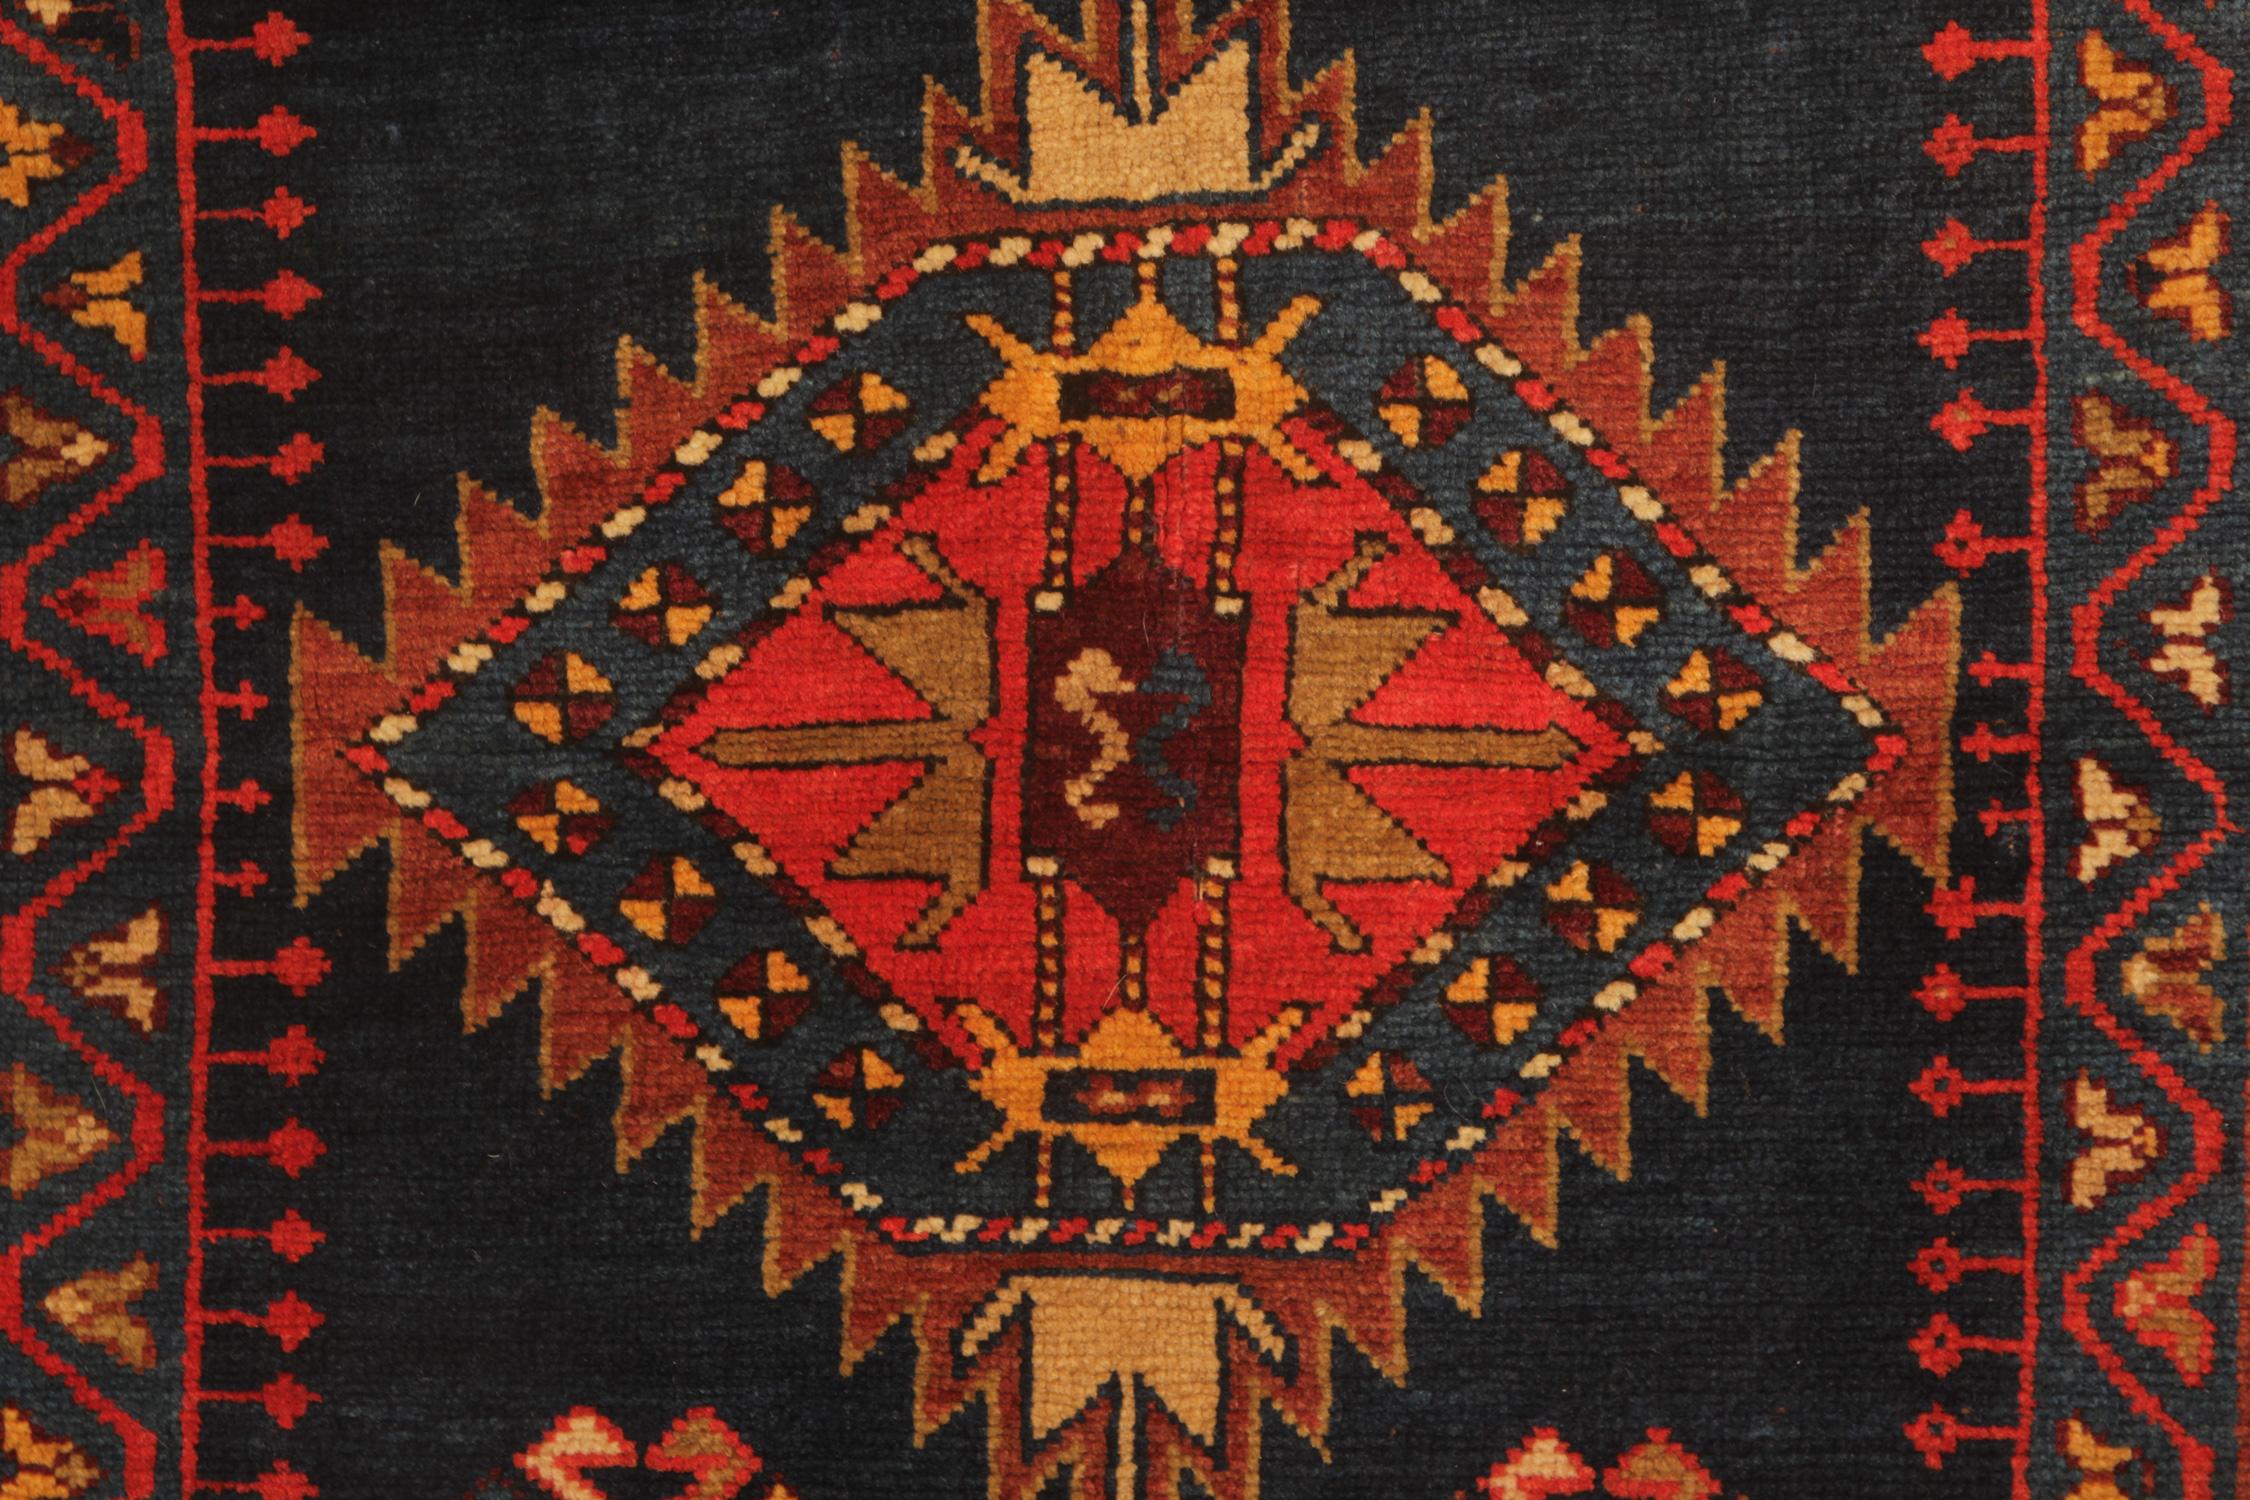 An excellent example of traditional Caucasian carpet rug weaving from the Kazak region. These medallion-patterned rugs can make an excellent accessory for your home interior. They add a cosy, warm feeling to any environment because of the great